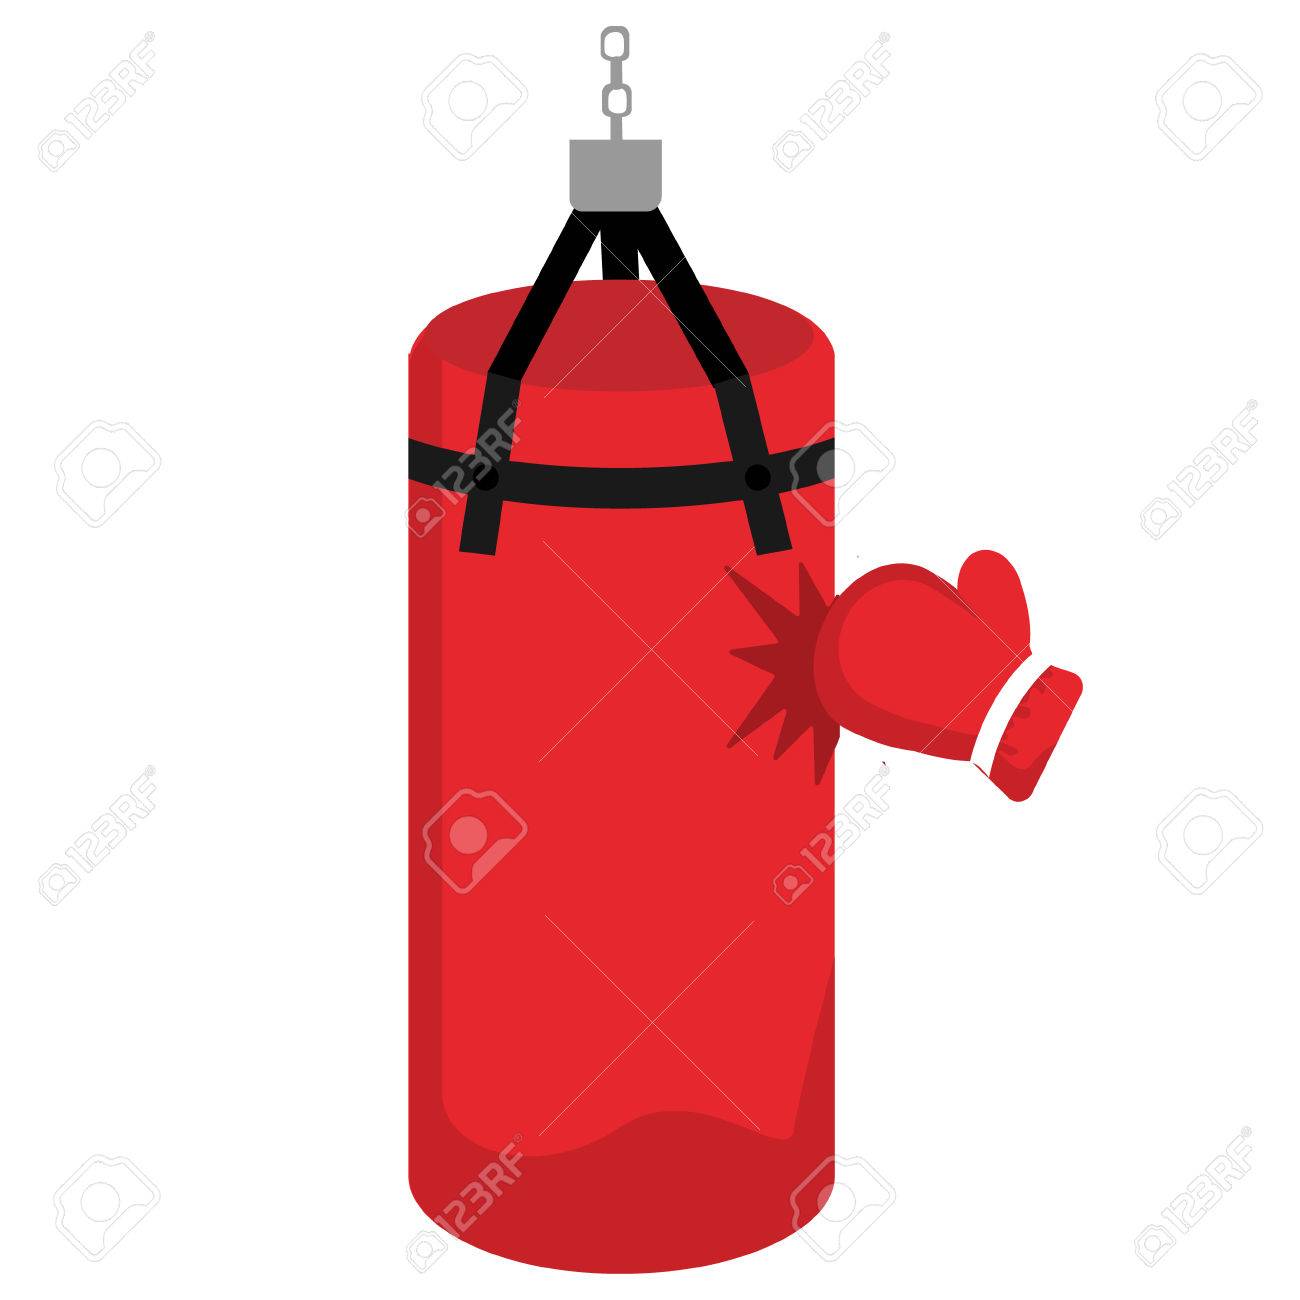 Punching bag with gloves.